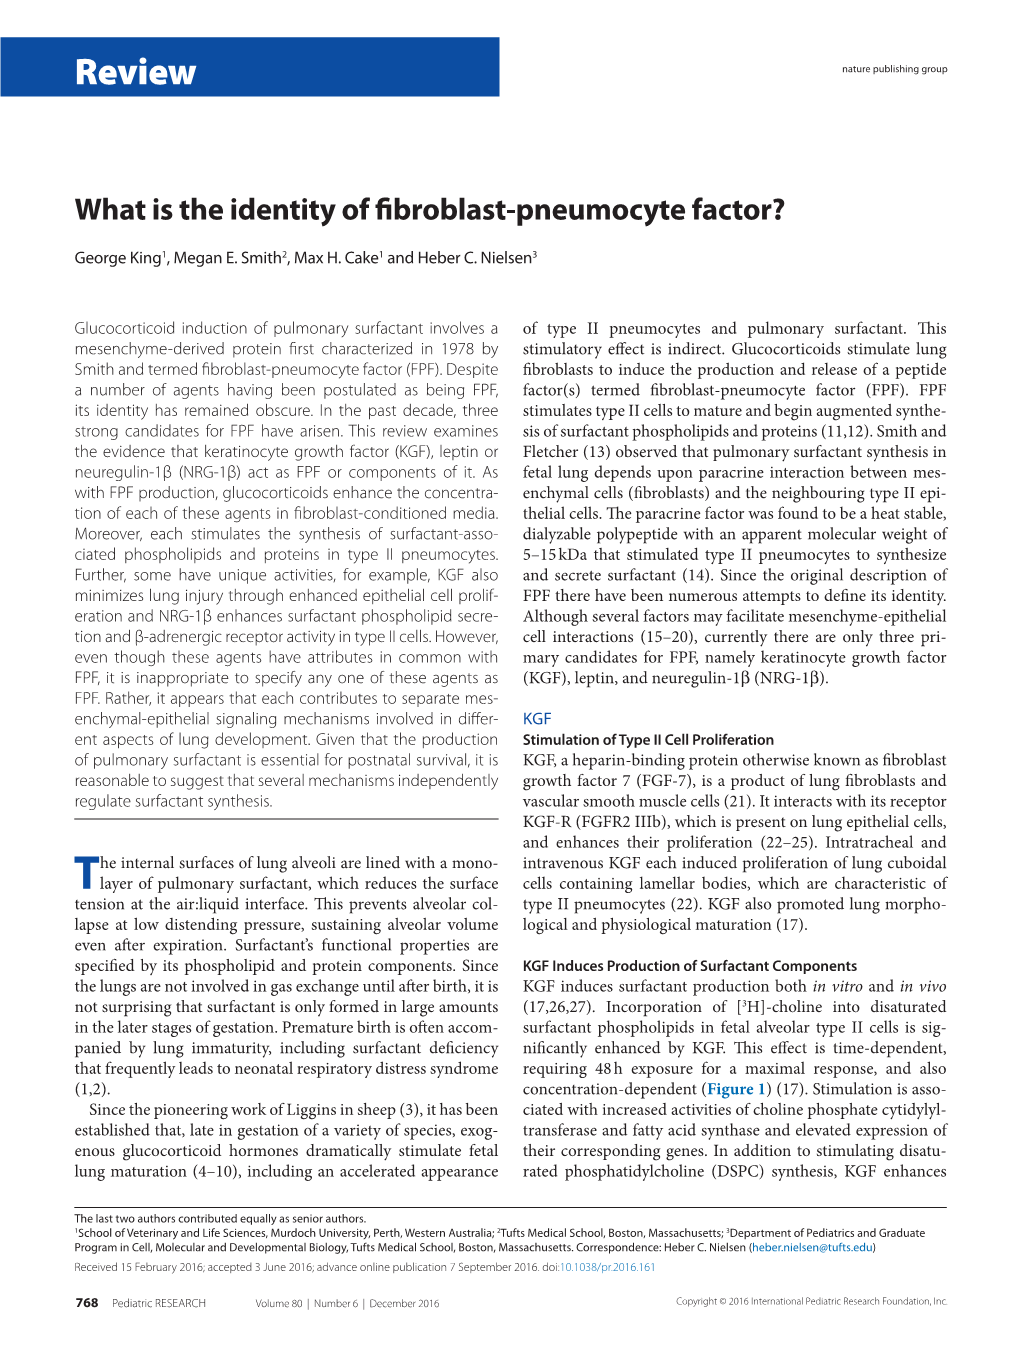 What Is the Identity of Fibroblast-Pneumocyte Factor?